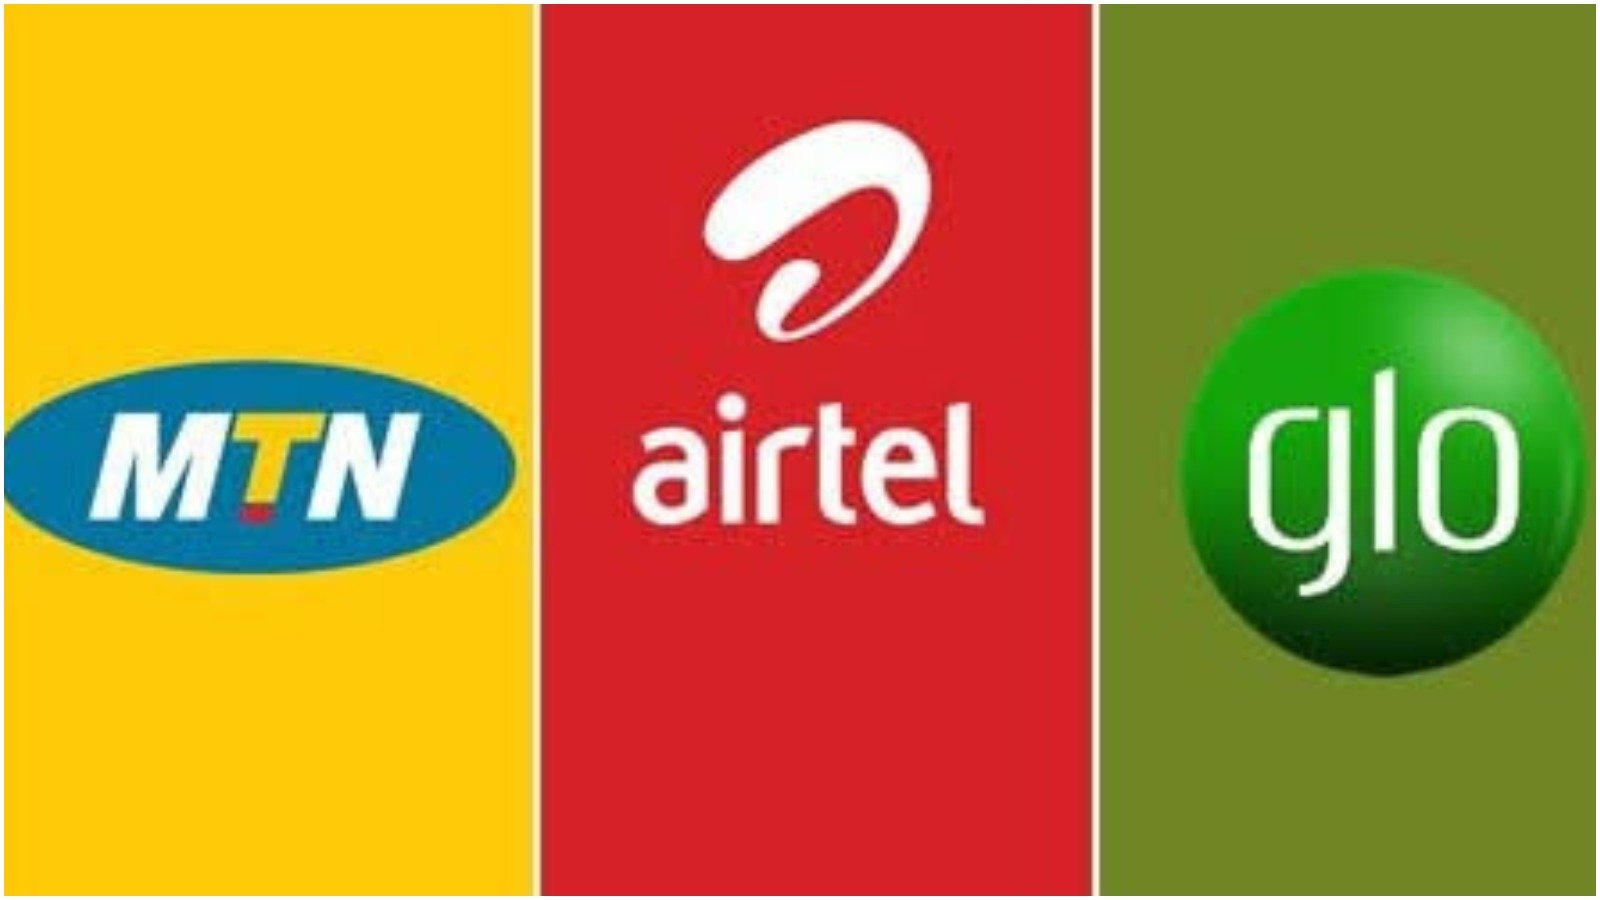 UPDATED: Nigeria’s top 3 GSM operators by market share